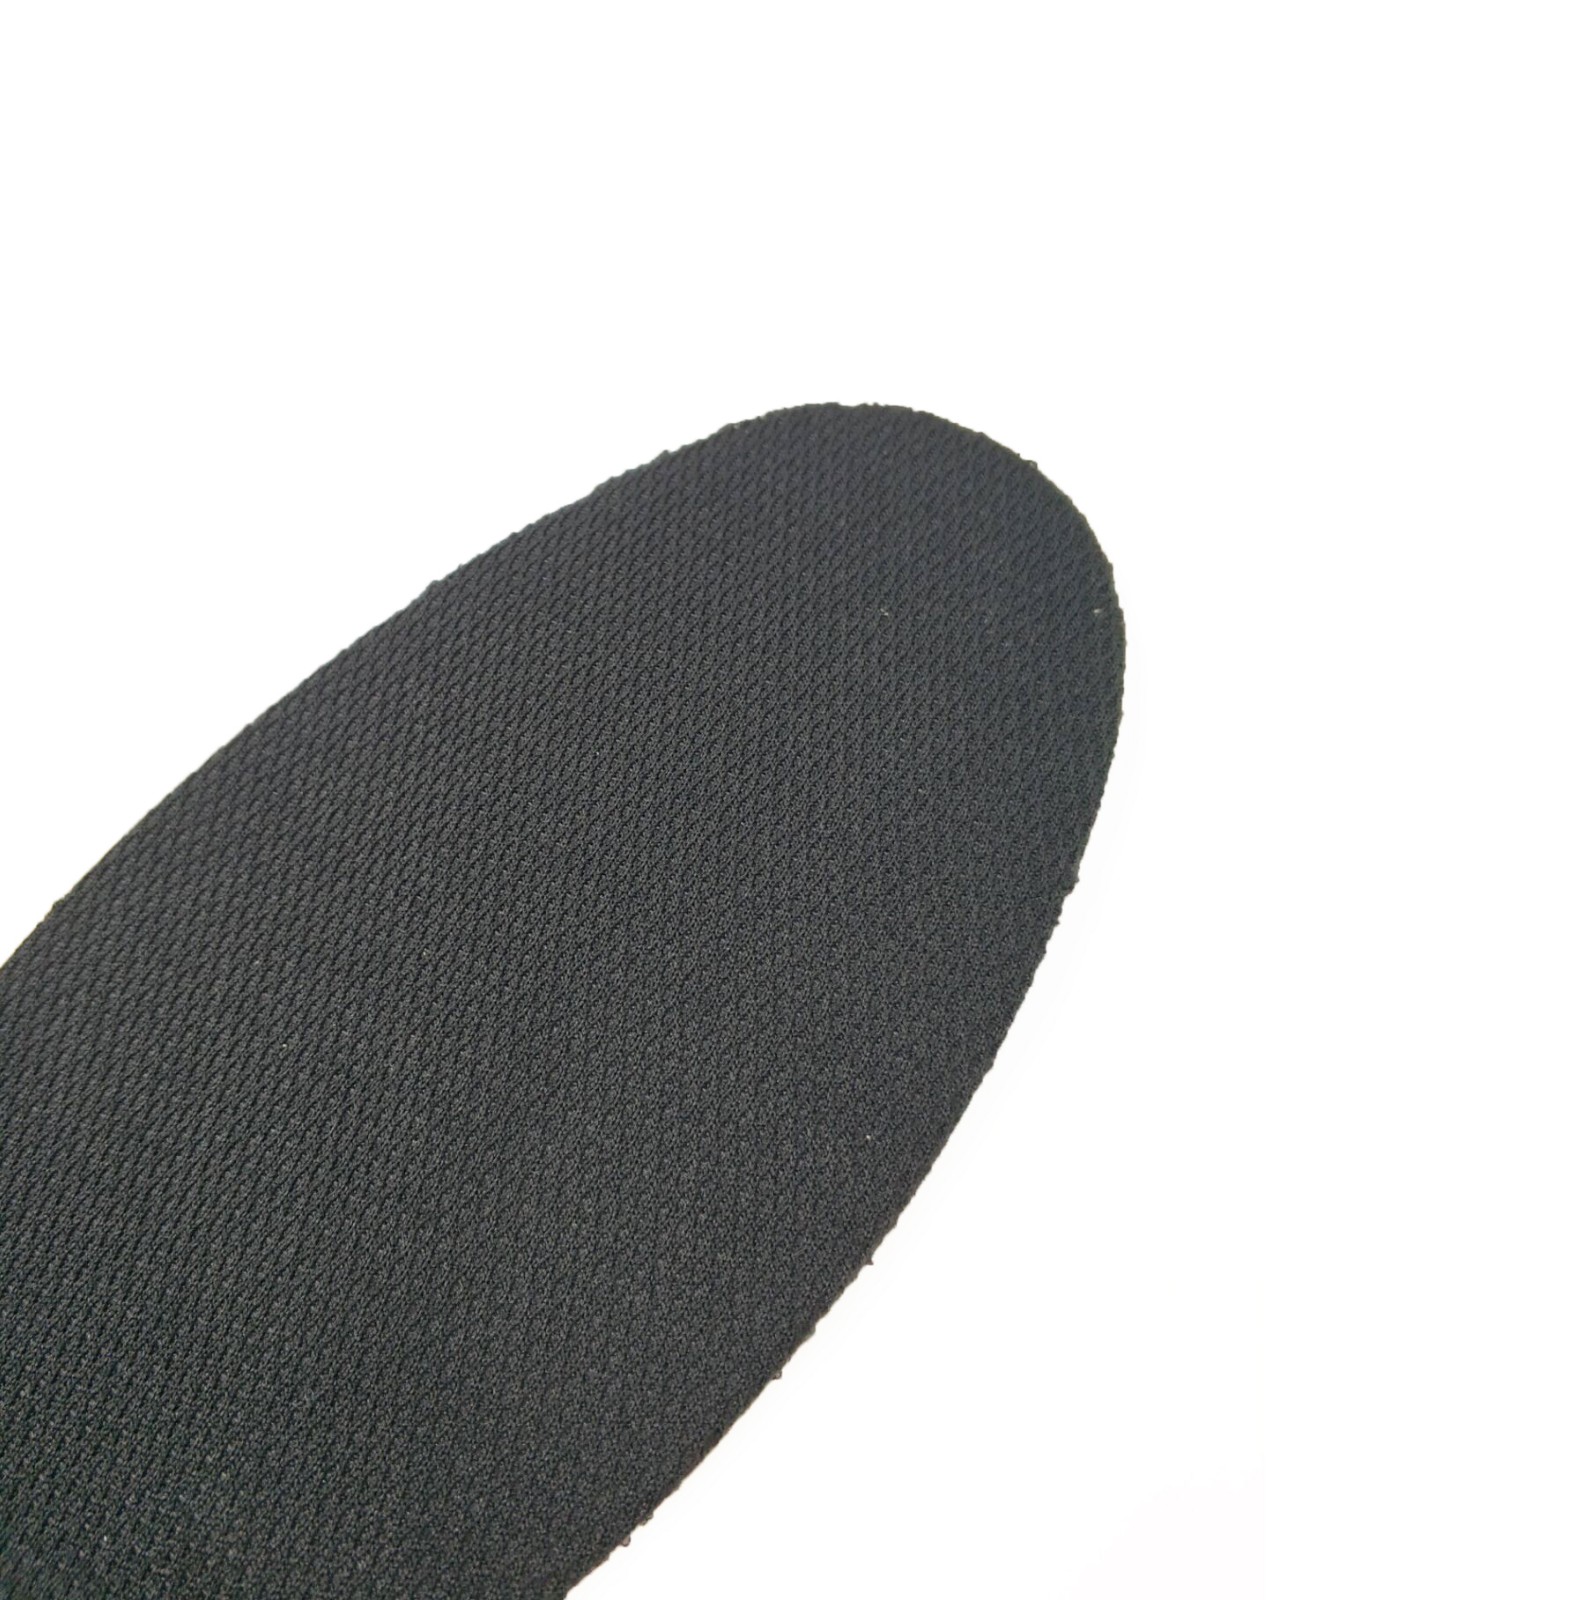 S-King-Professional Heated Insoles Best Heated Insoles Manufacture-5